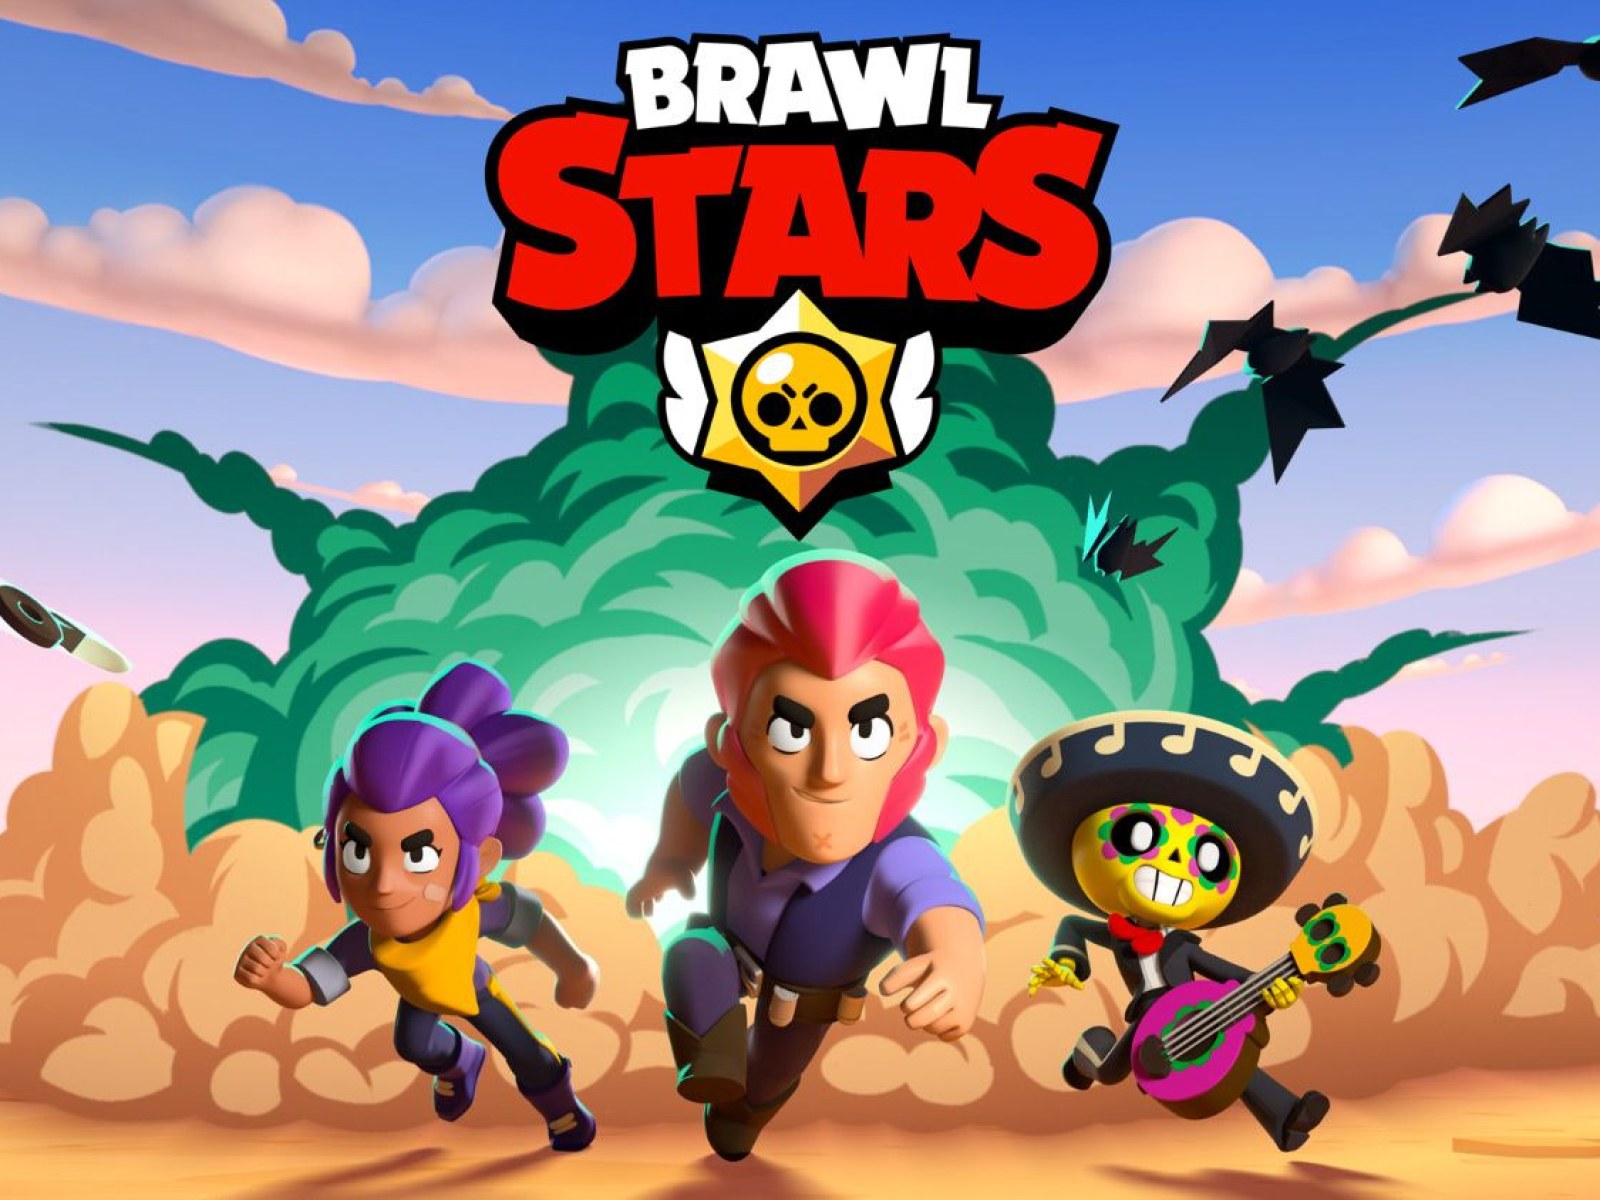 Brawl Stars Beginner S Guide Best Brawlers And Tips For Winning Gem Grab Mode - what kind of brawl star character are you